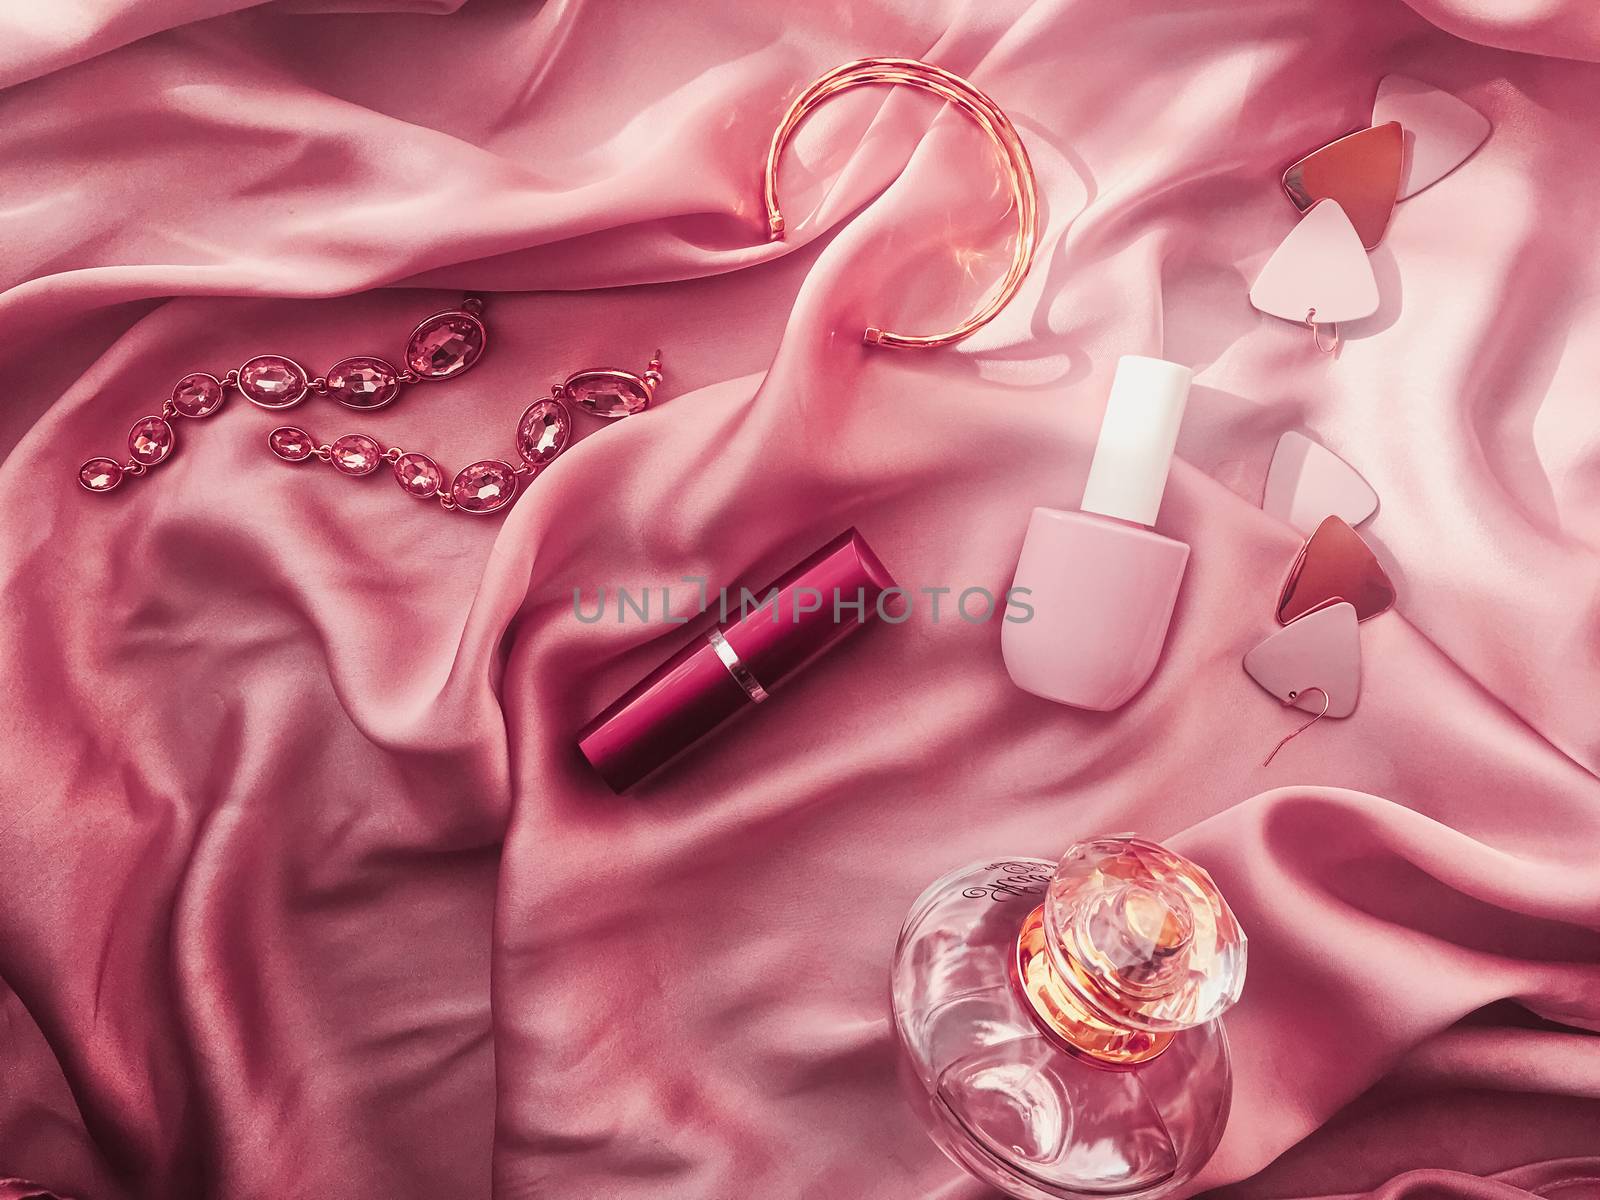 Fashionable and stylish accessories, jewelry and make-up products on pink silk background, beauty and fashion concept